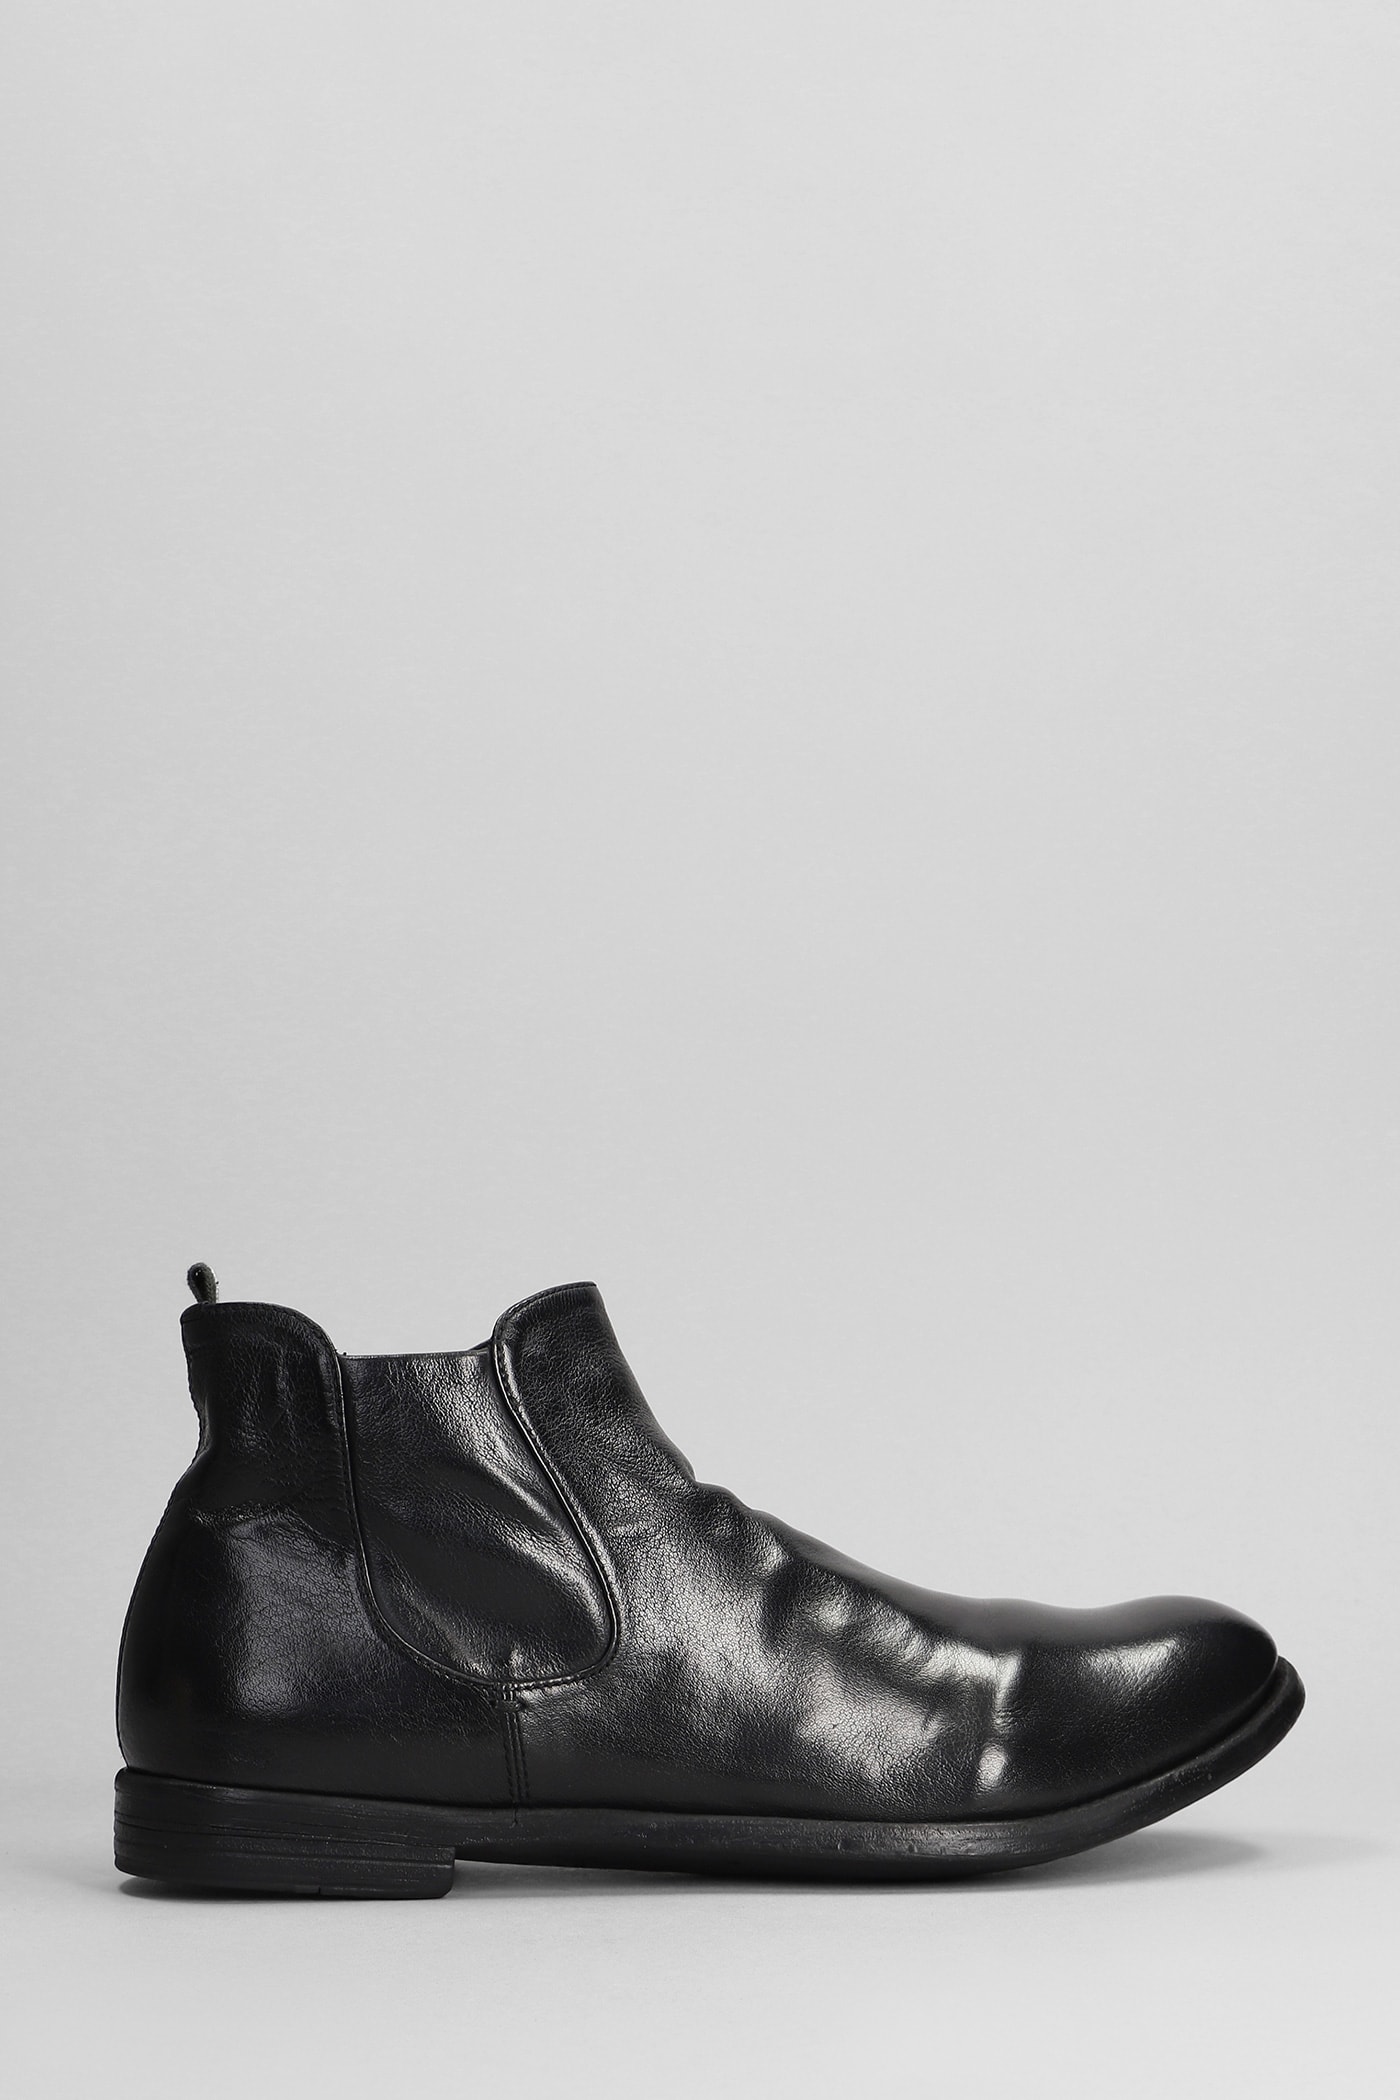 Officine Creative Arc -514 Ankle Boots In Black Leather